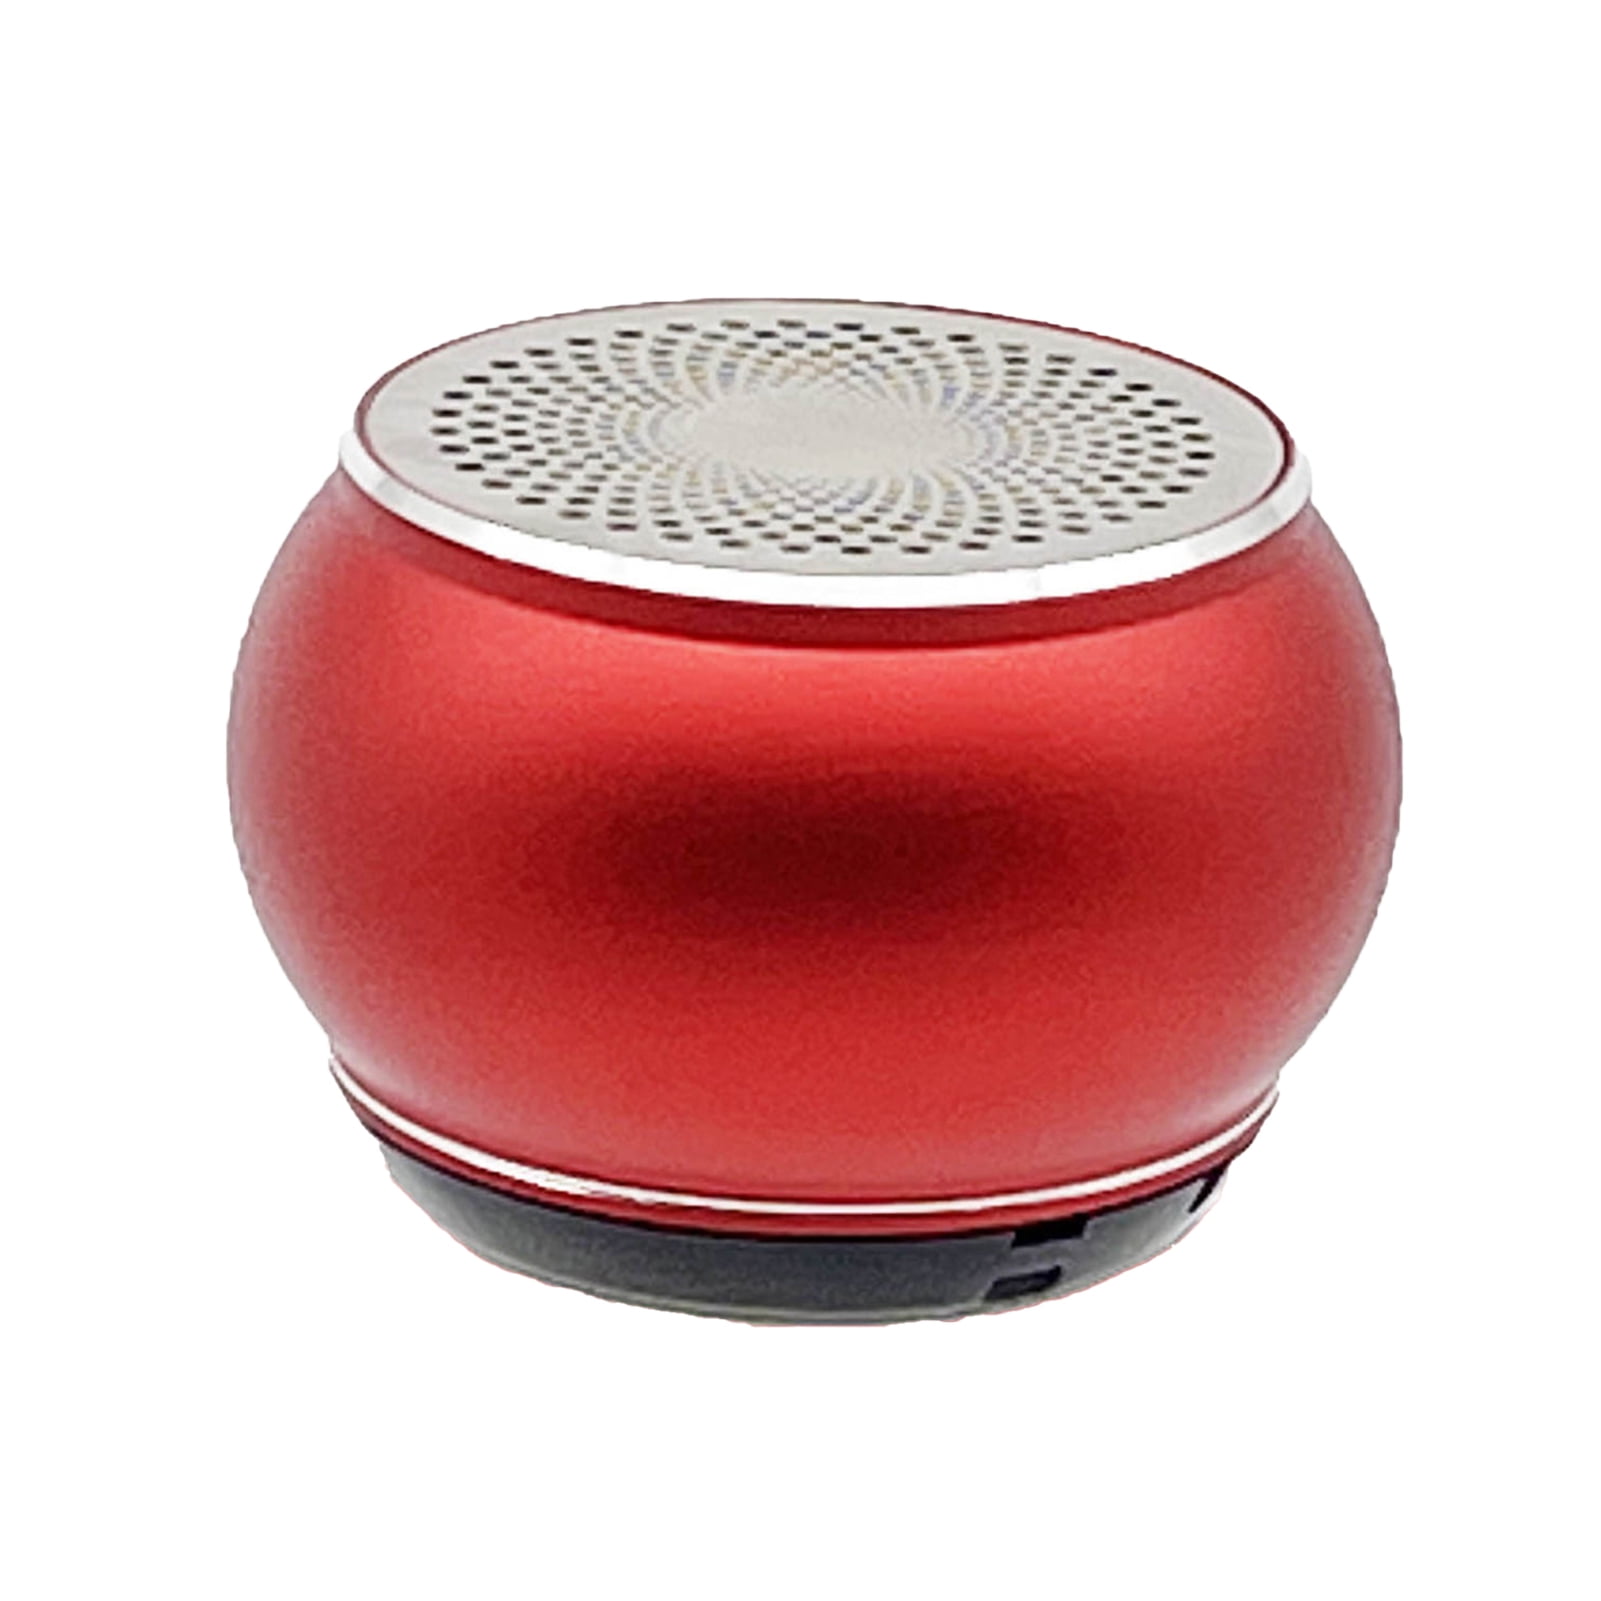 Mini Car Speaker Wireless Stereo Portable Support Loudspeaker Interconnection Boc Hands-free Calling Bluetooth-compatible5.0 for HiFi